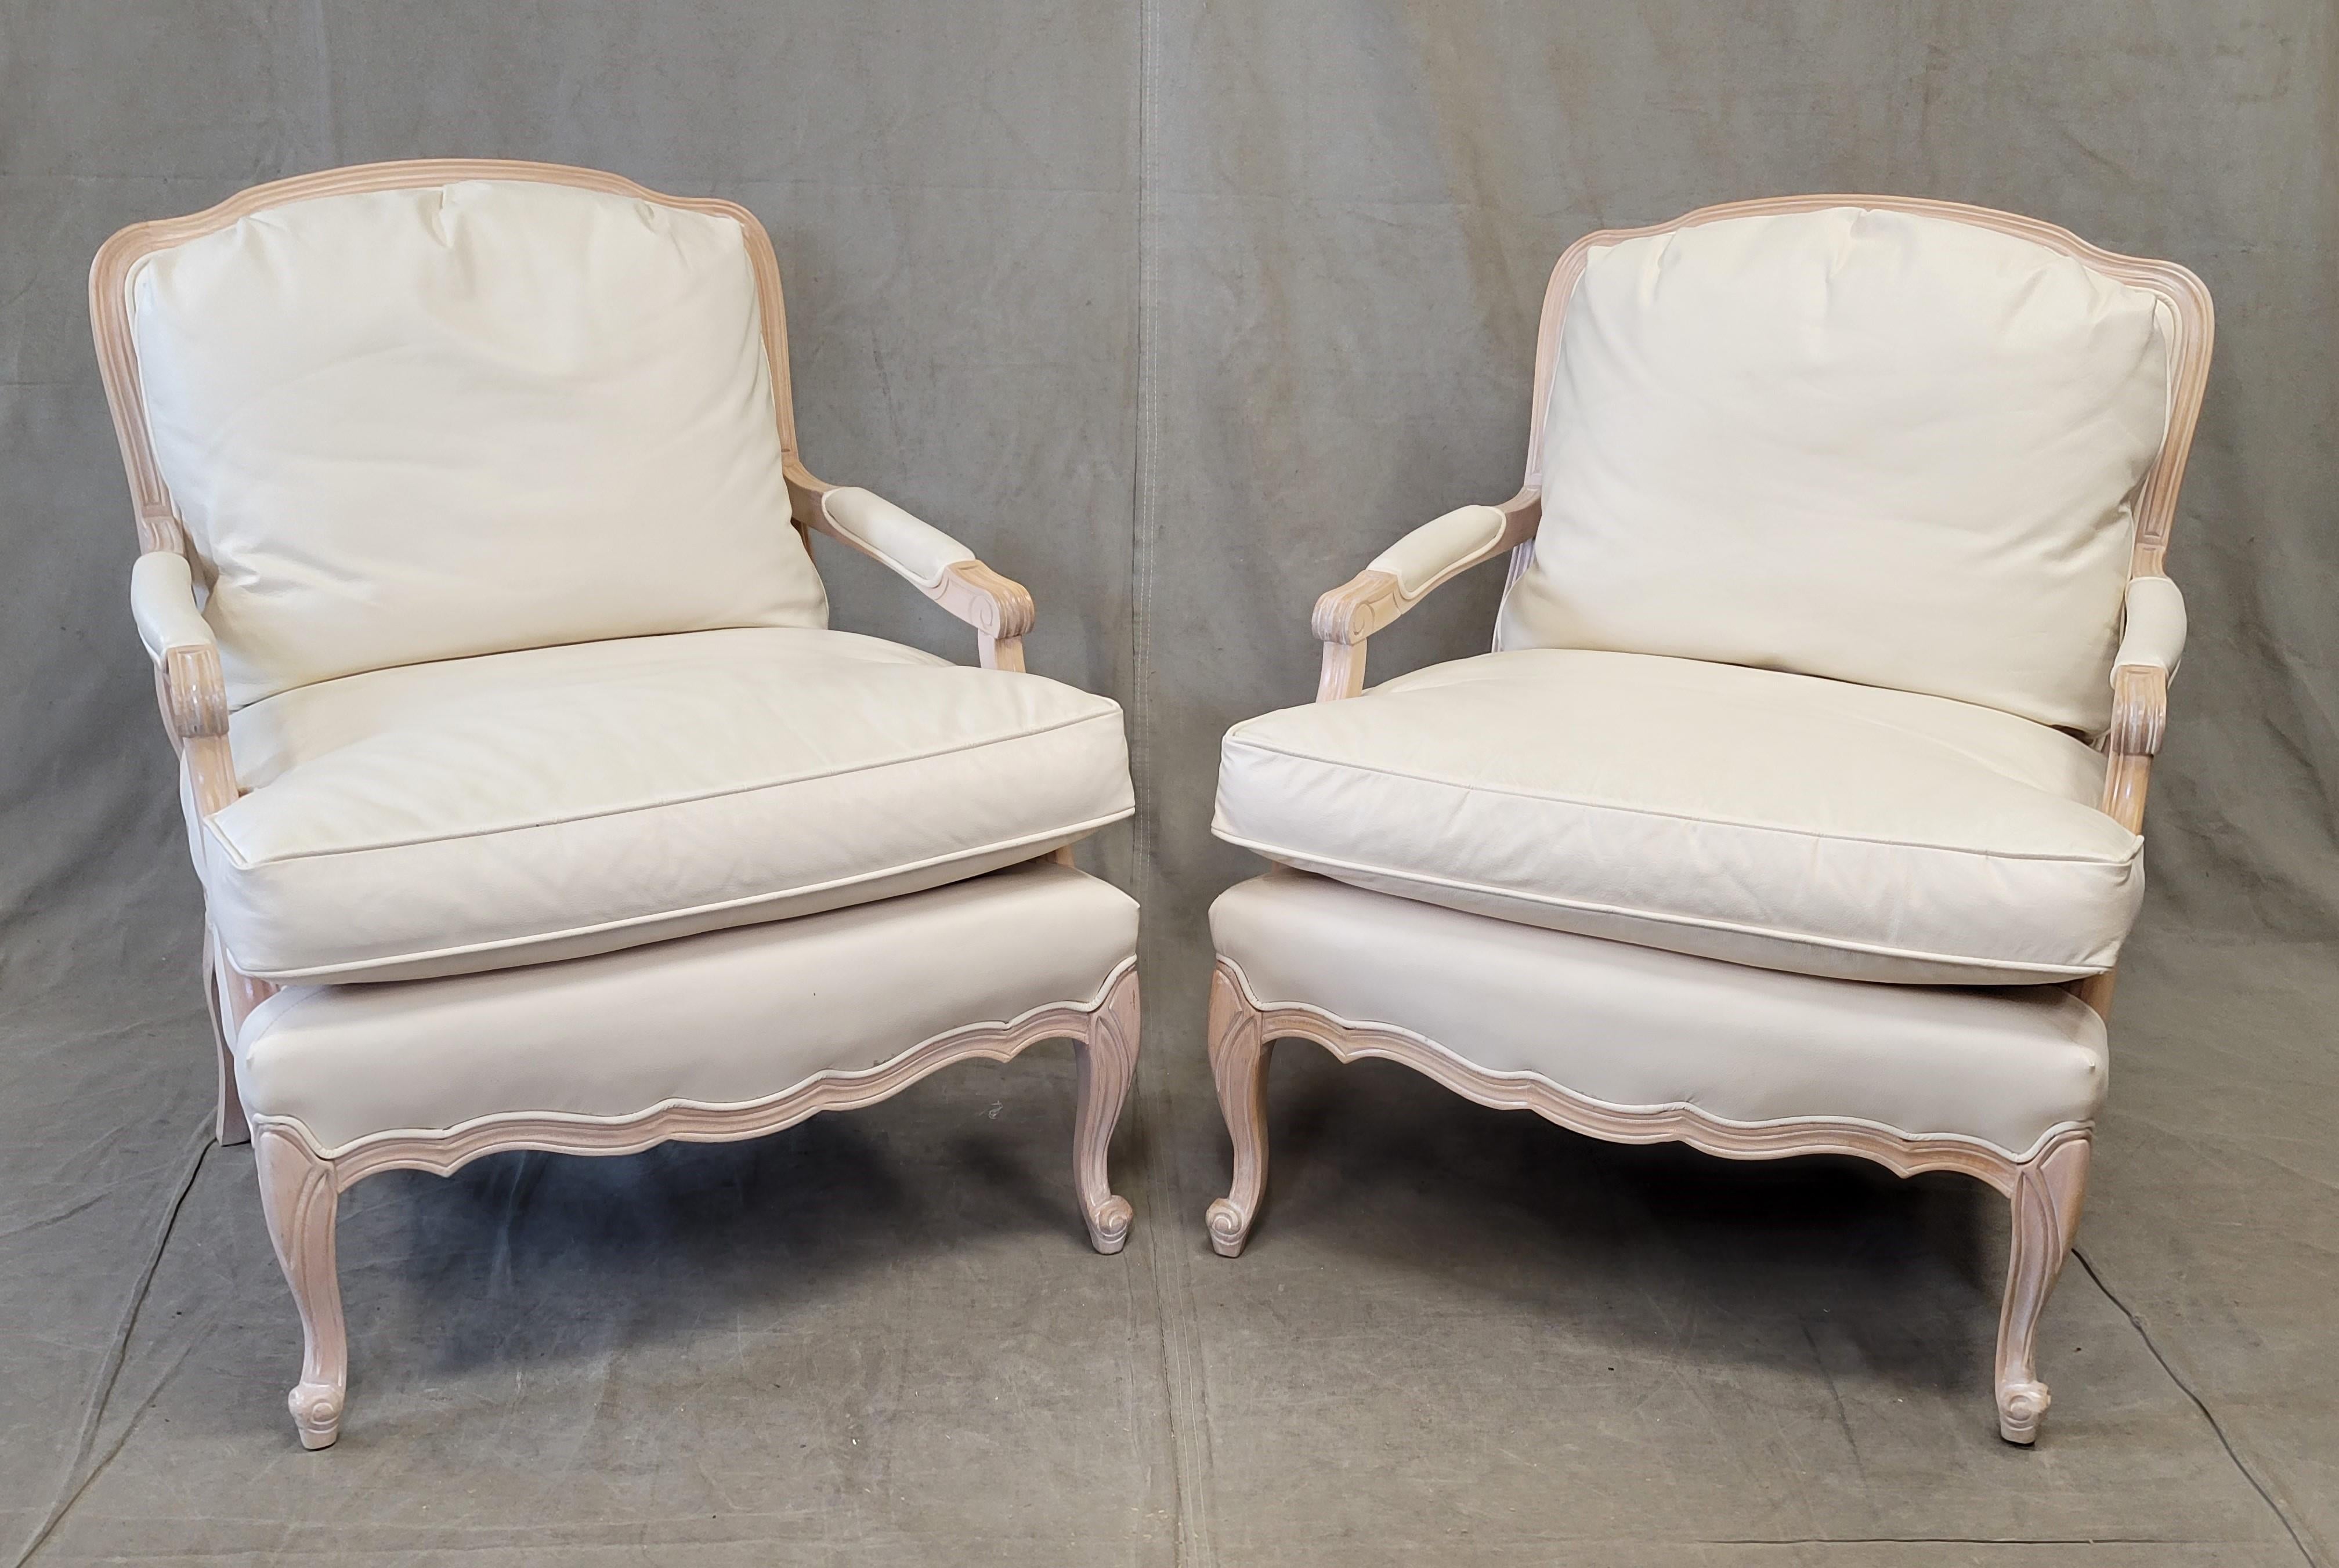 A beautiful, classic set of vintage 1990s Sam Moore white washed maple wood frame bergere chairs with custom upholstery in ivory grain leather (not bonded leather, not faux leather), see second to last photo. See photo of white computer paper on the